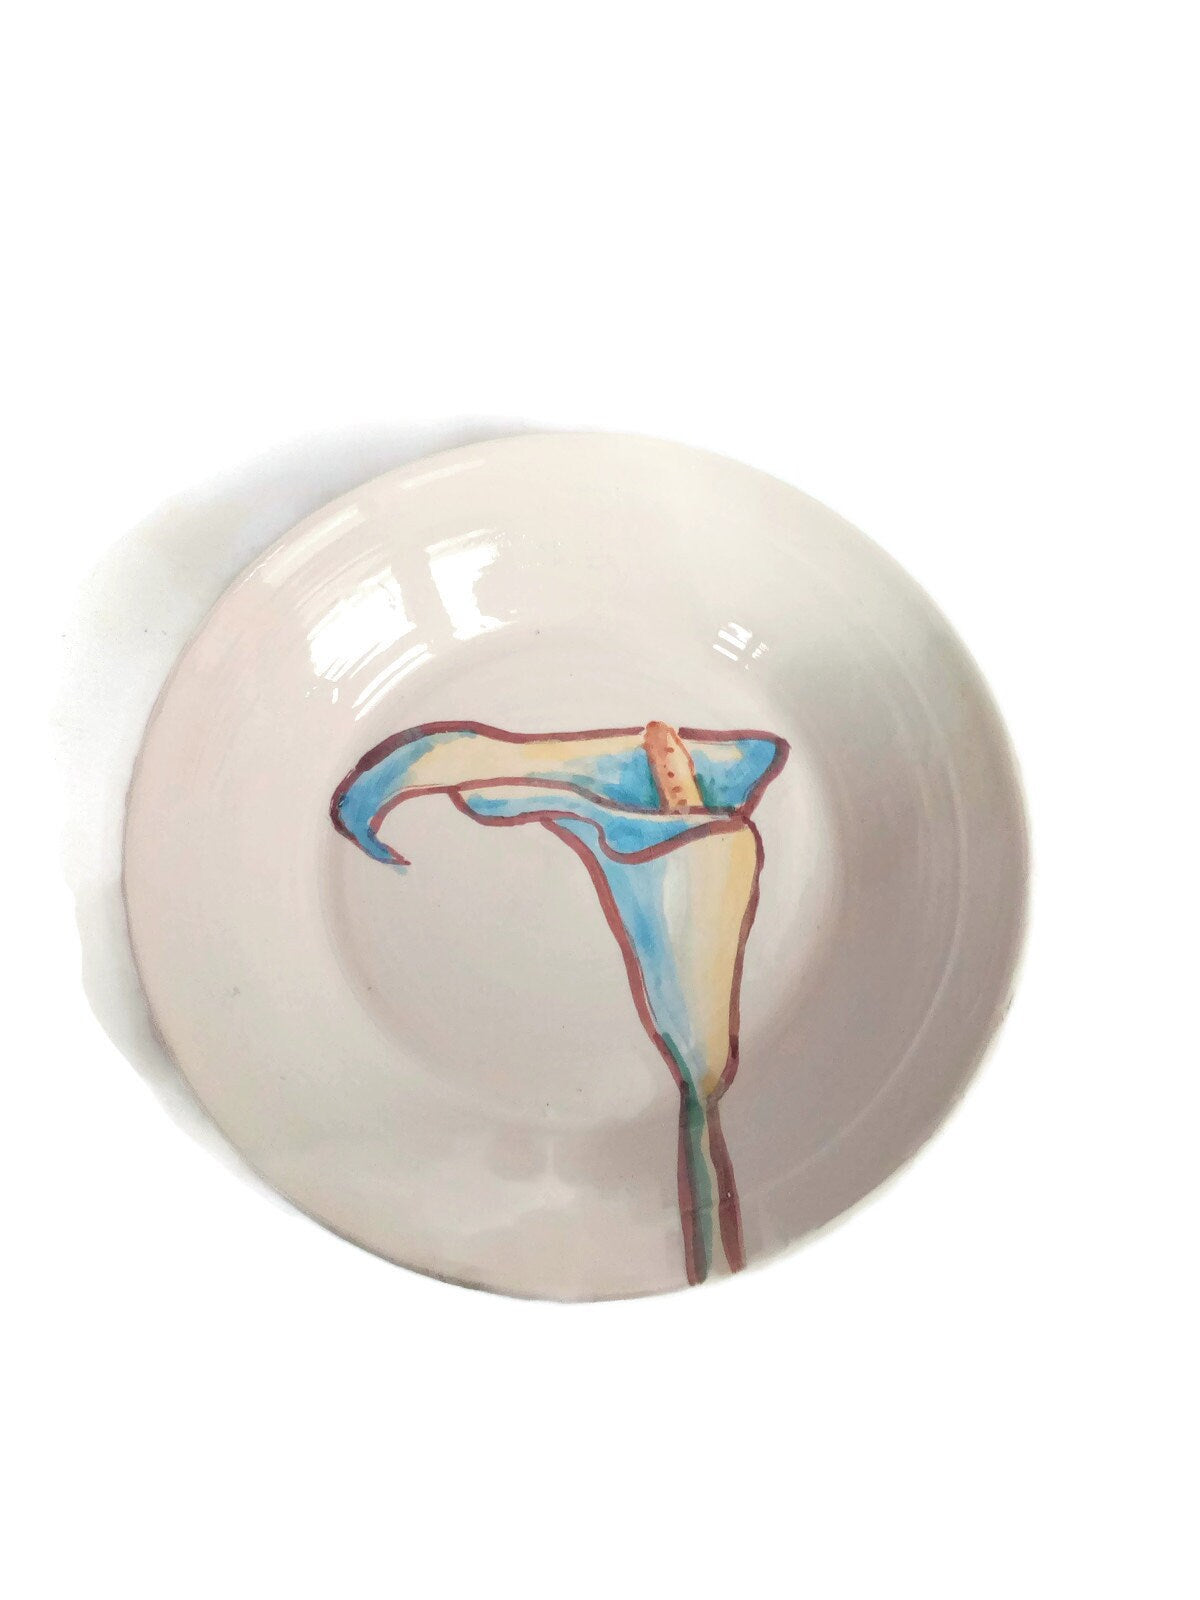 Handmade Ceramic Round Plate Hand Painted Calla Lily, Portuguese Pottery Wall Decor Use For Serving Dish, Unique Dinner Plates For Display - Ceramica Ana Rafael